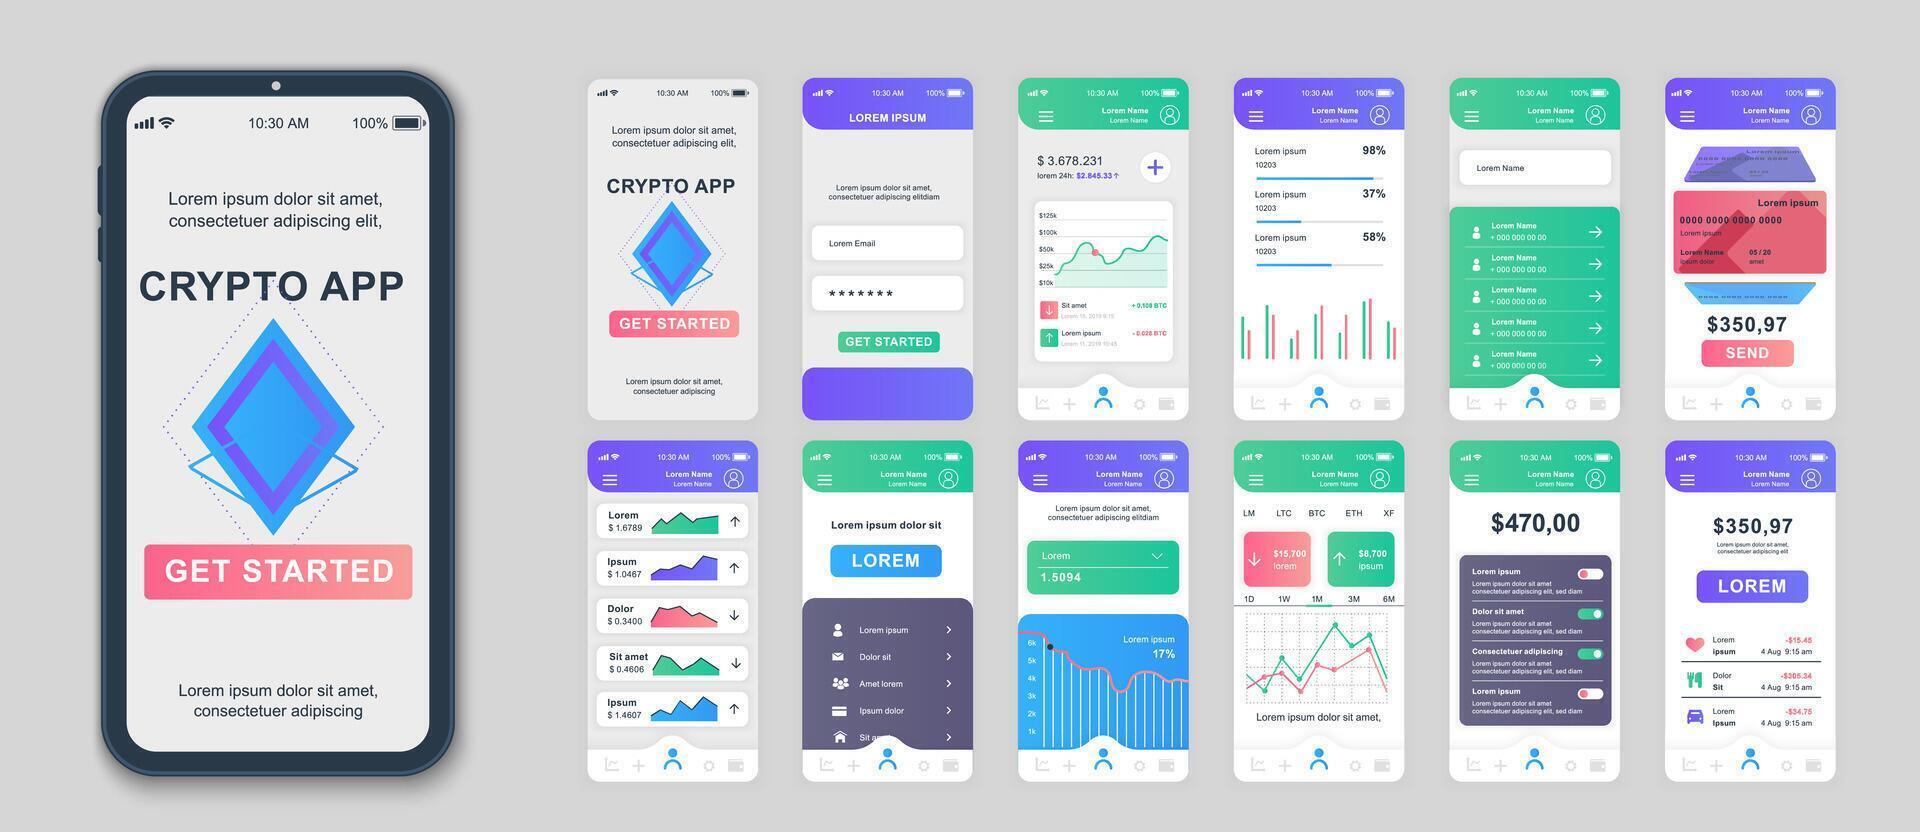 Crypto mobile app screens set for web templates. Pack of profile login, financial statistics, cryptocurrency datum, online trade. UI, UX, GUI user interface kit for cellphone layouts. Vector design